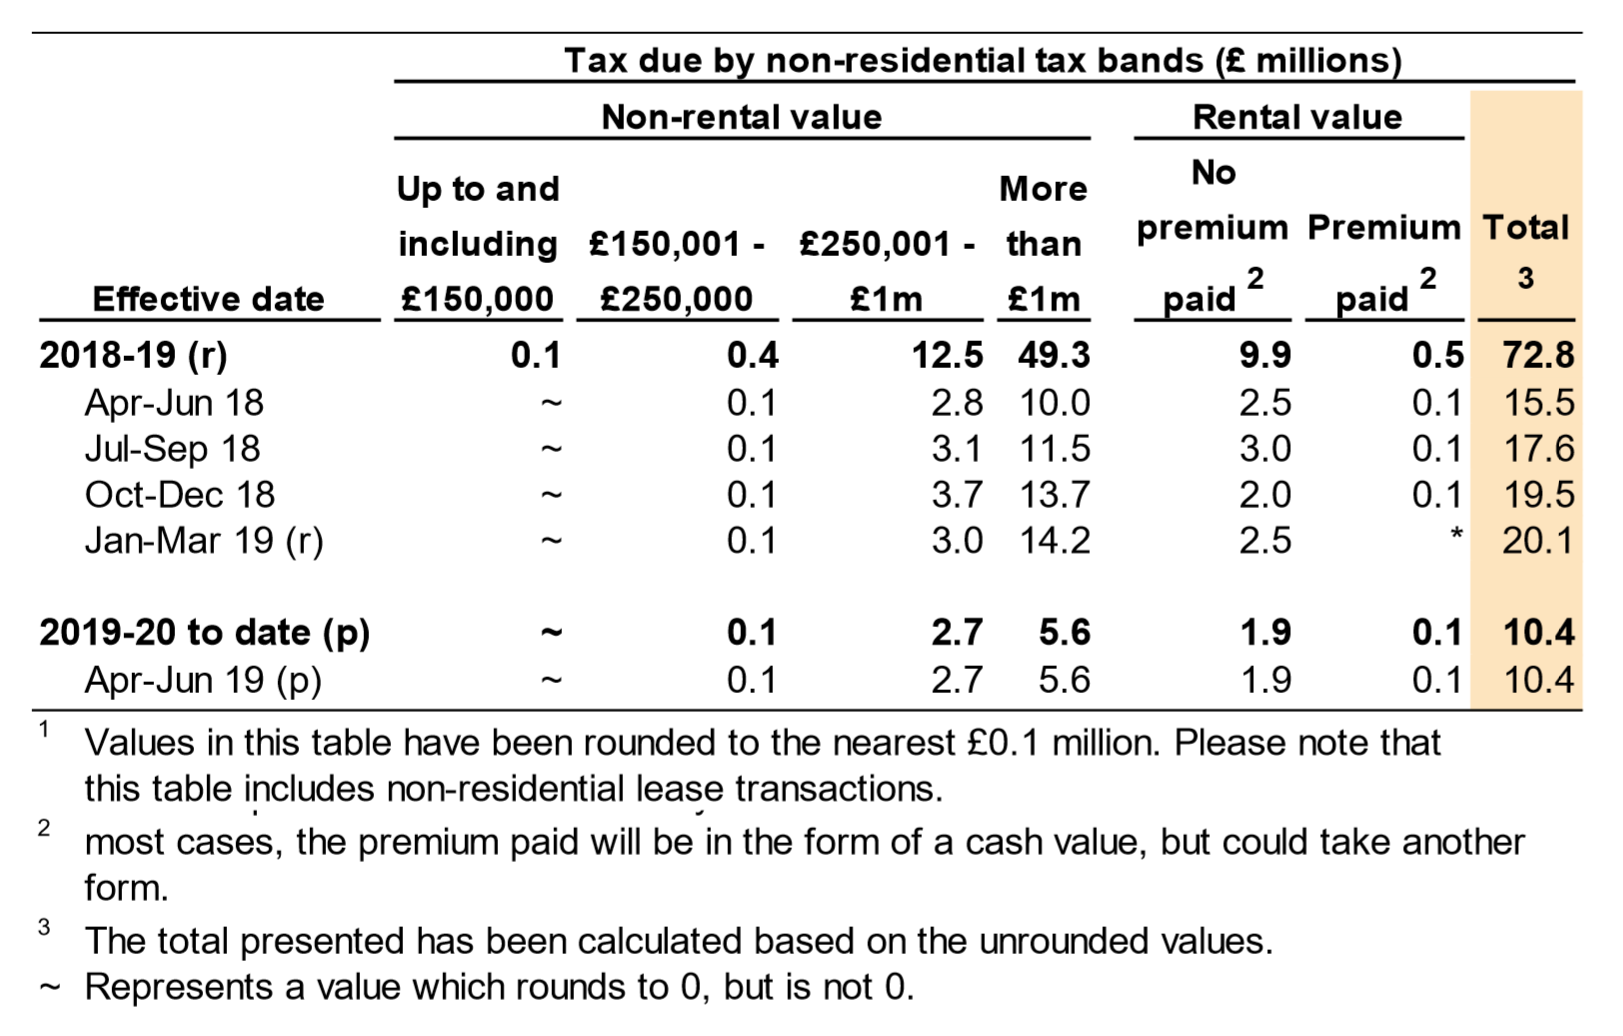 Figure 4.2 shows the amount of tax due on non-residential transactions by value of the property. Data is shown for the year and quarter in which the transaction was effective.